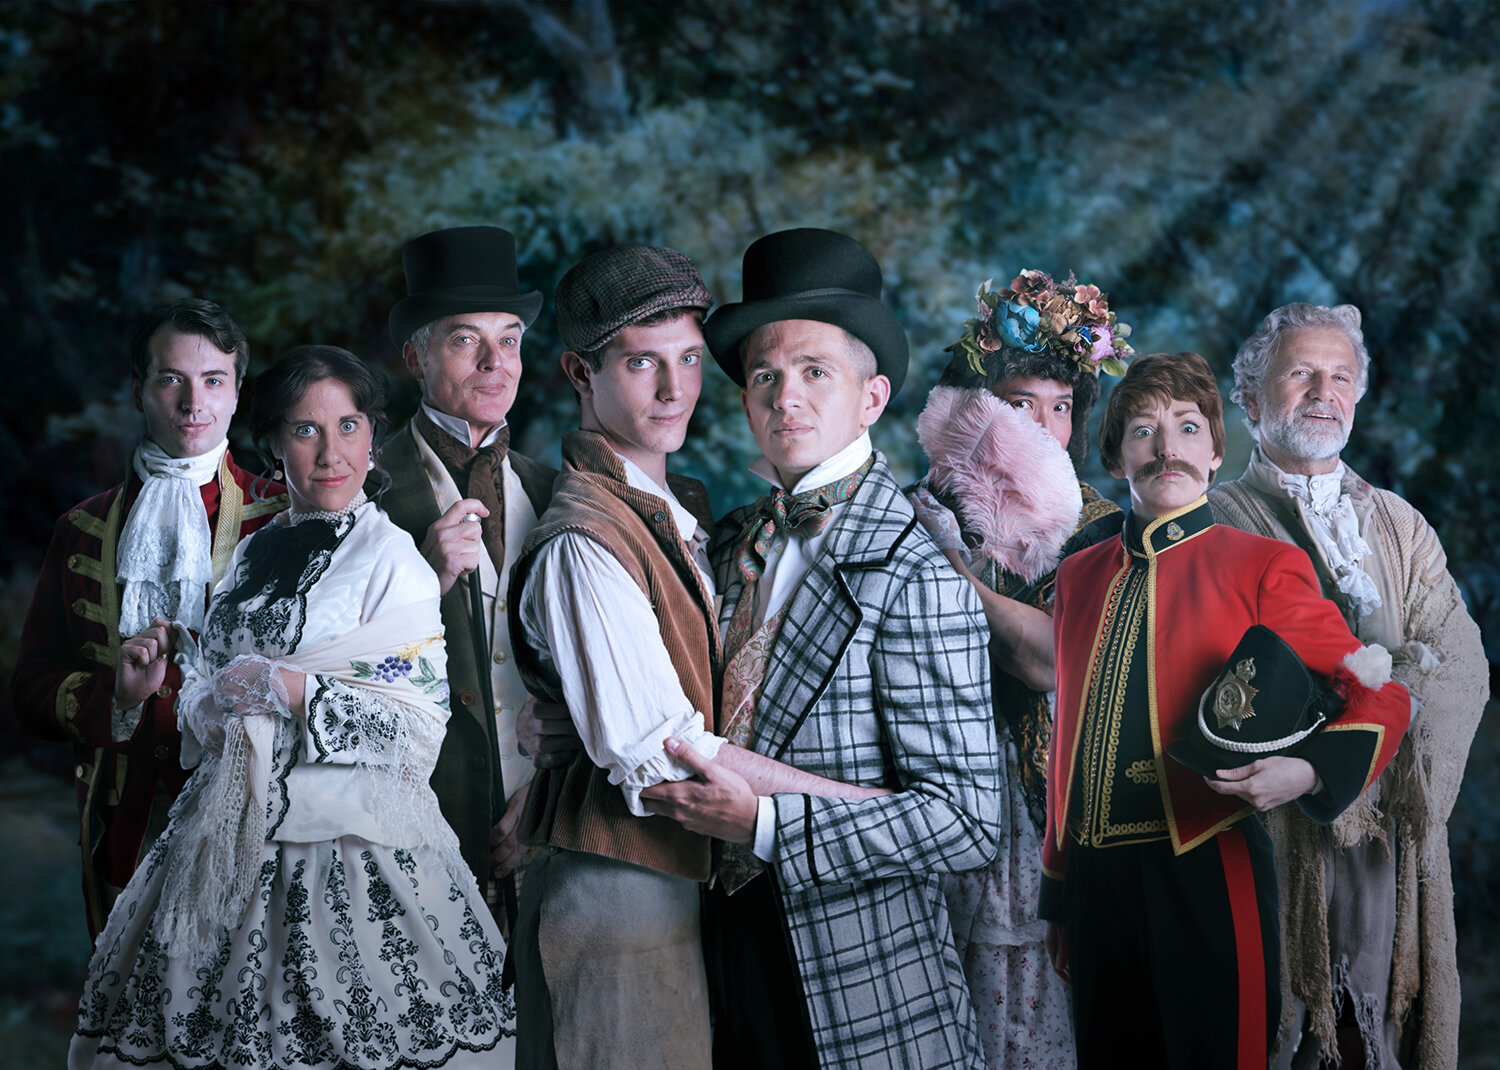 Promo photo for the musical "The Pleasure Garden" with the original London cast. (Photo: abovethestag.org.uk)